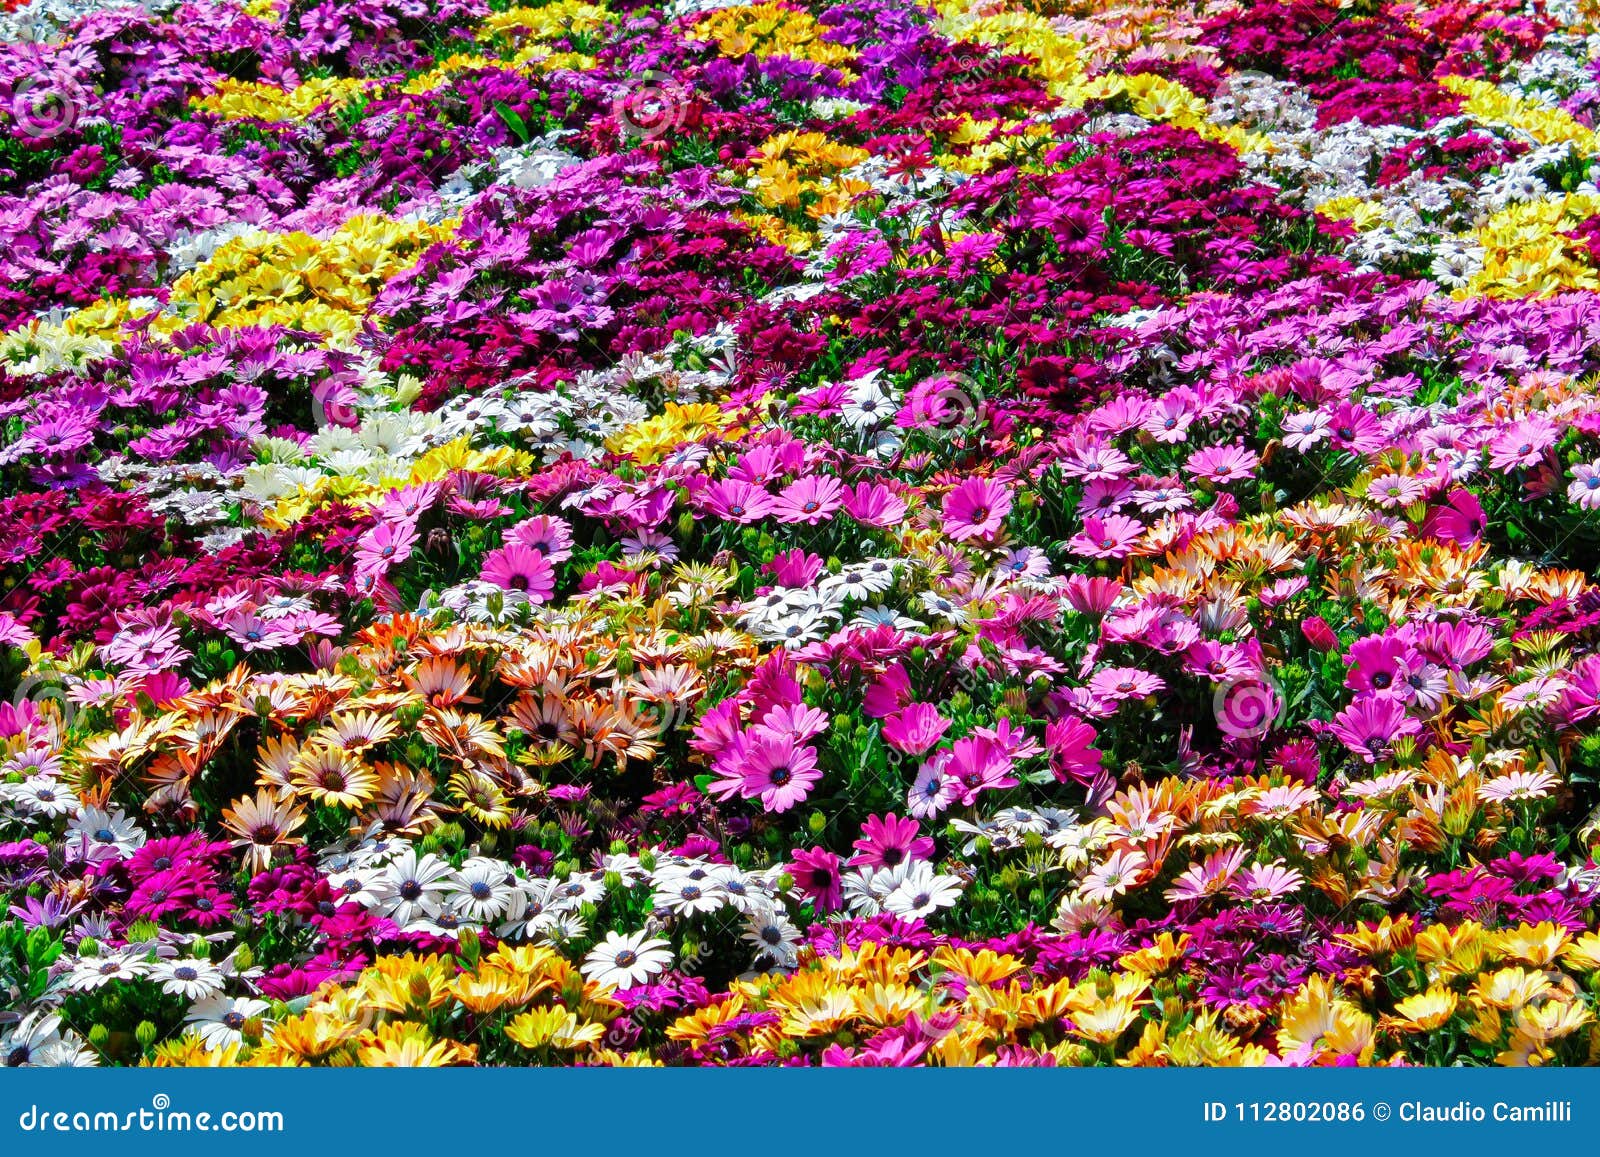 wall pattern of multicolored flowers